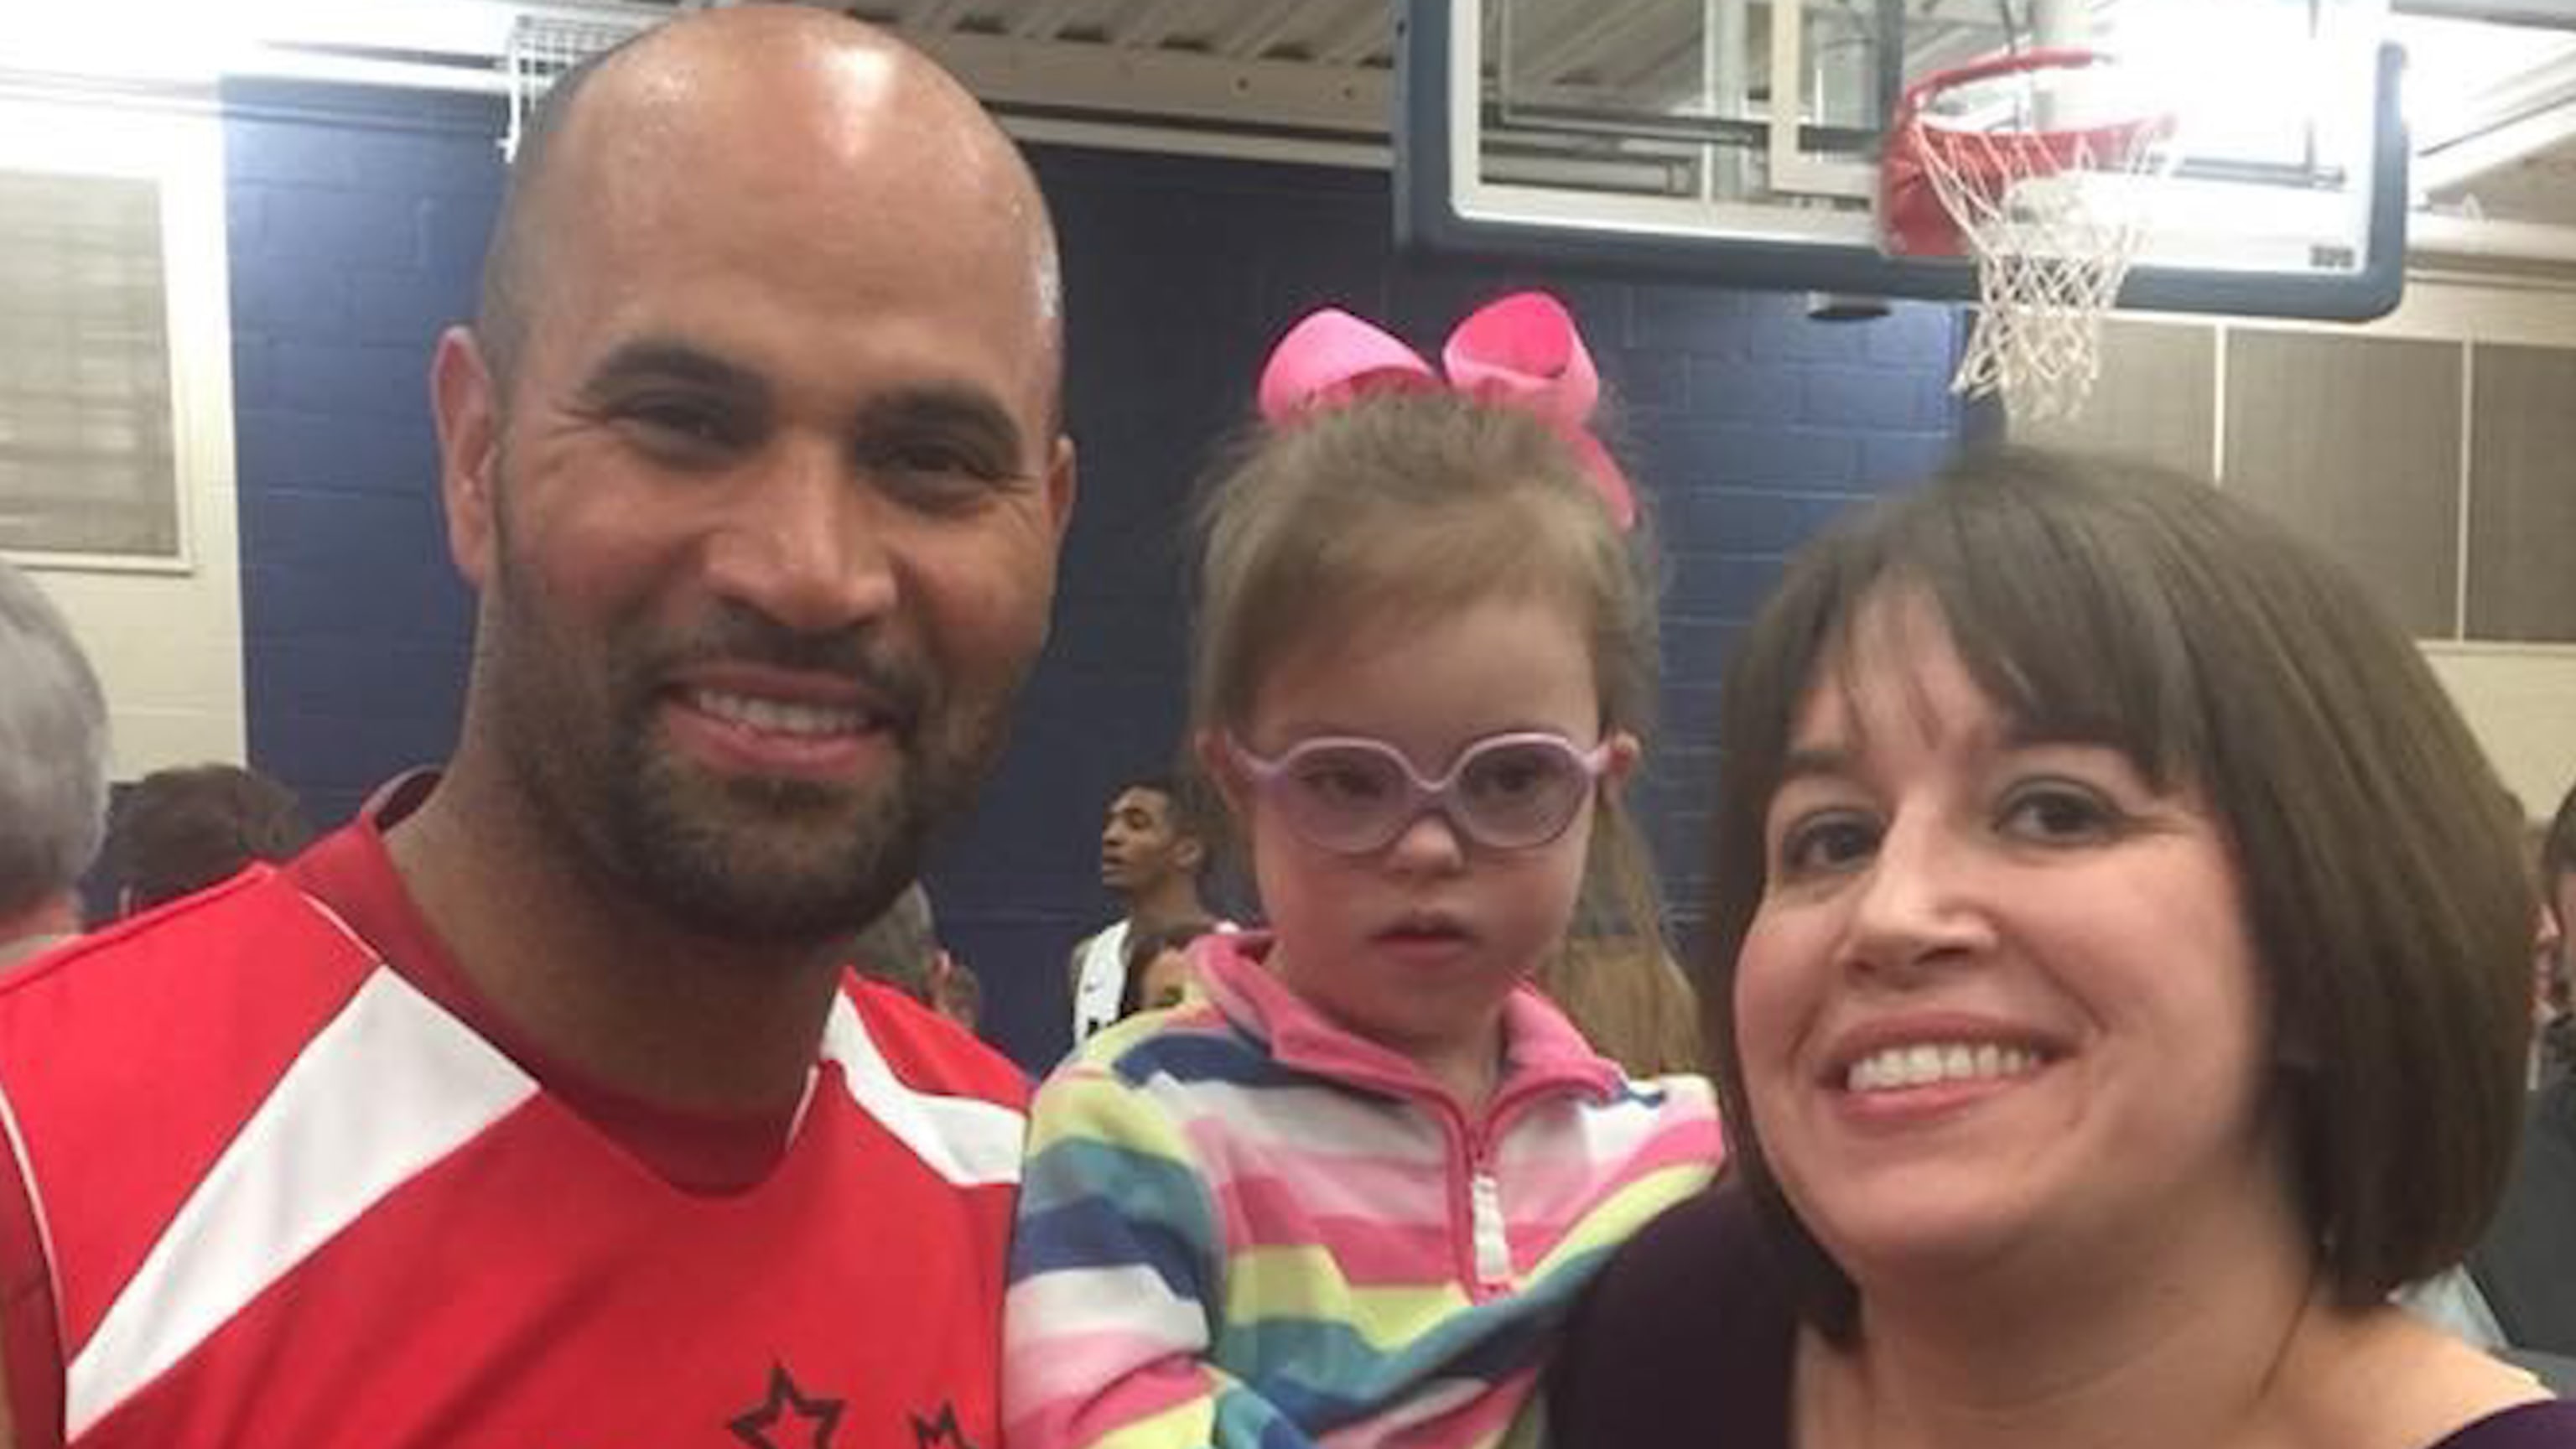 MLB Legend Albert Pujols Makes a Promise to His Son While Celebrating a  Major Family Achievement - EssentiallySports